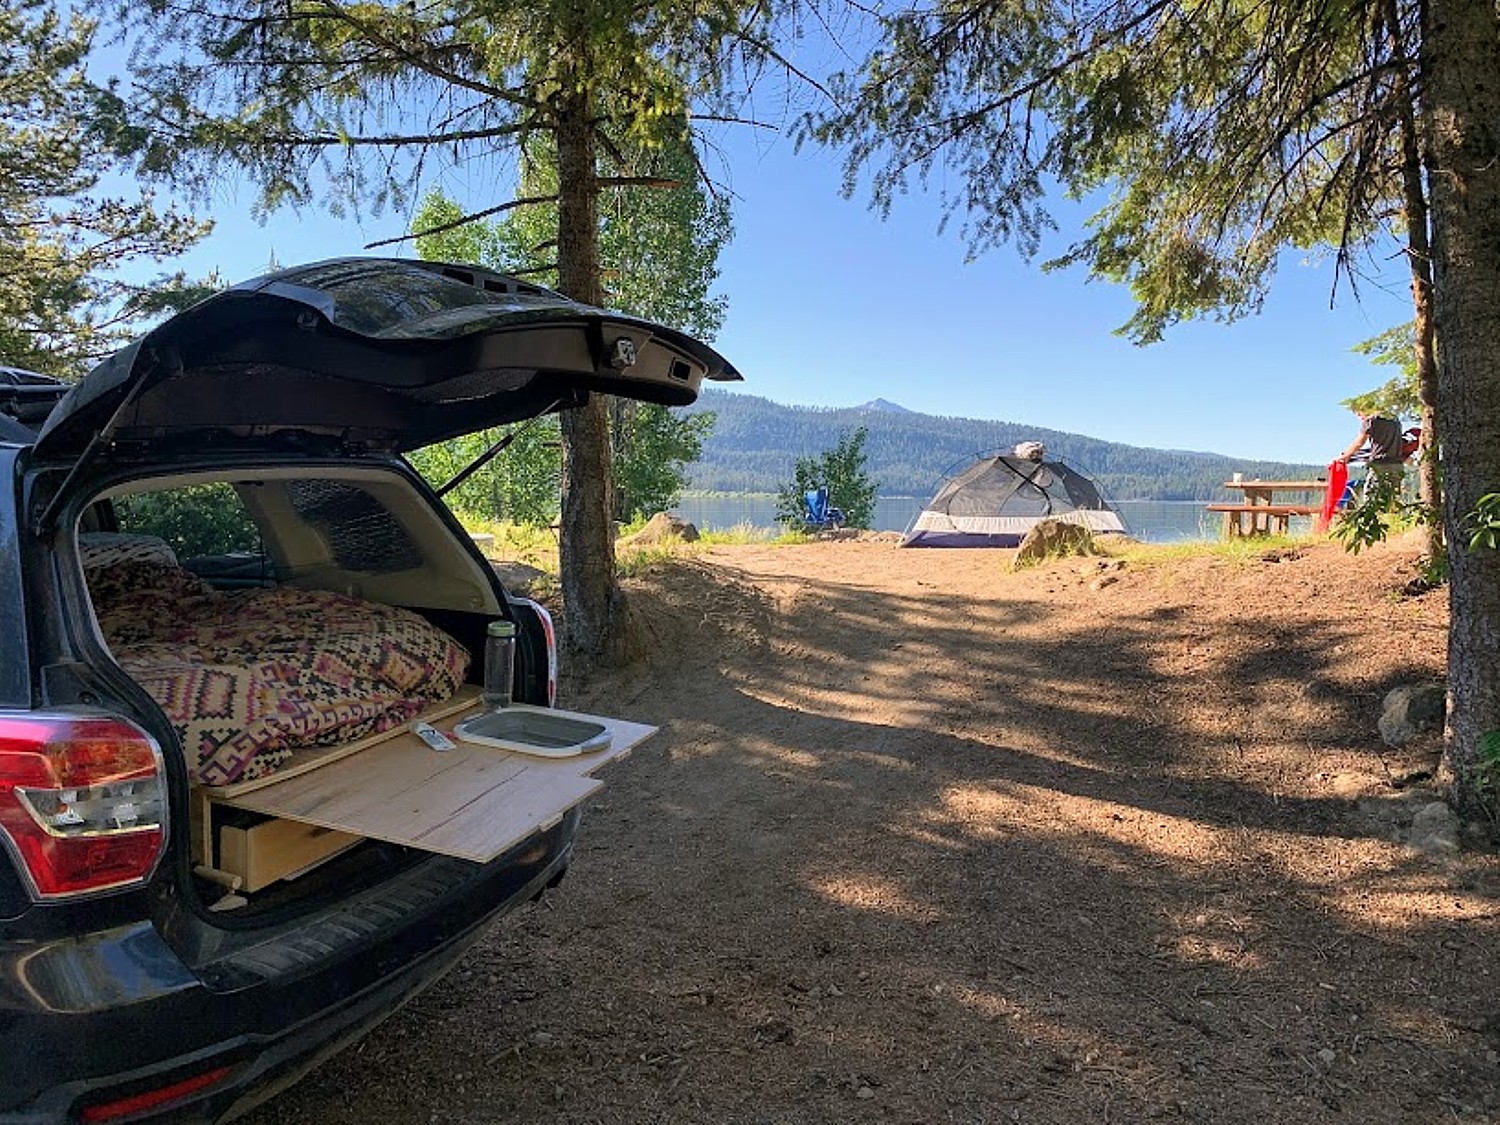 Car Camping in Comfort: How We Turned our Subaru into Our Home On